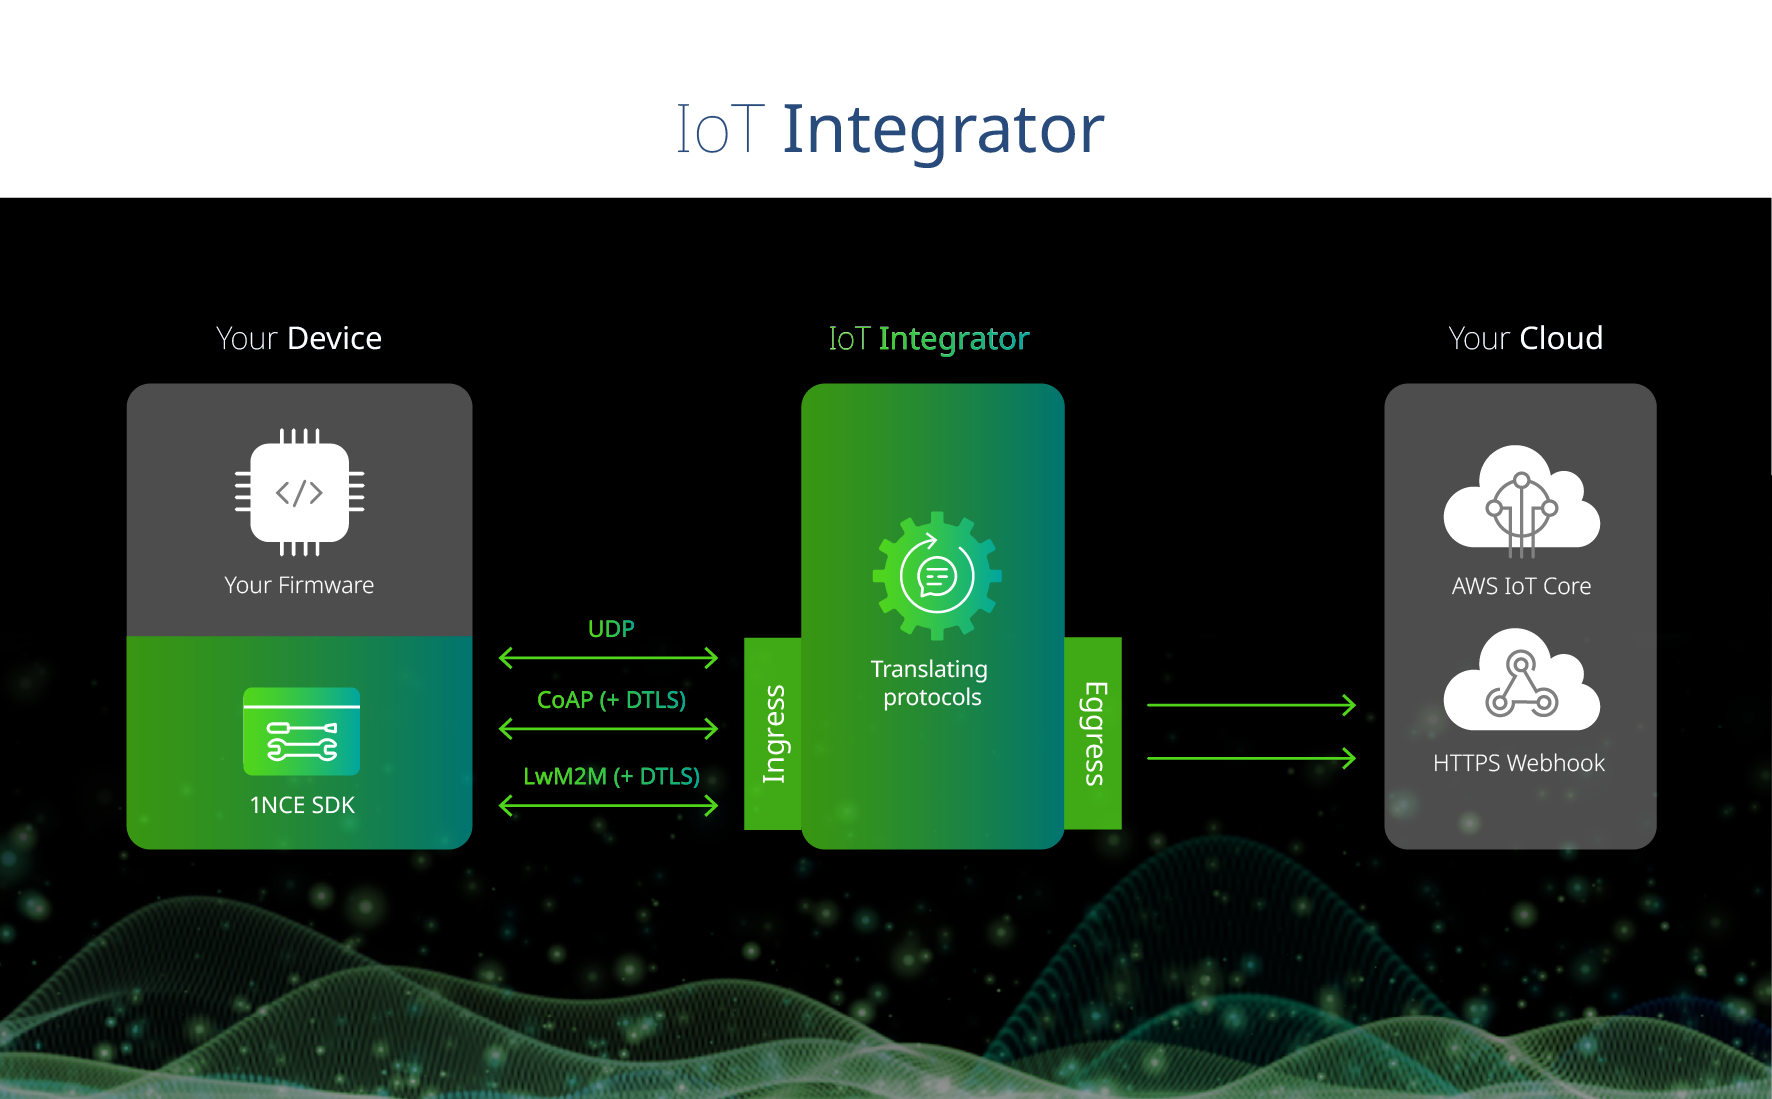 Device Integrator as part of the IoT Integrator